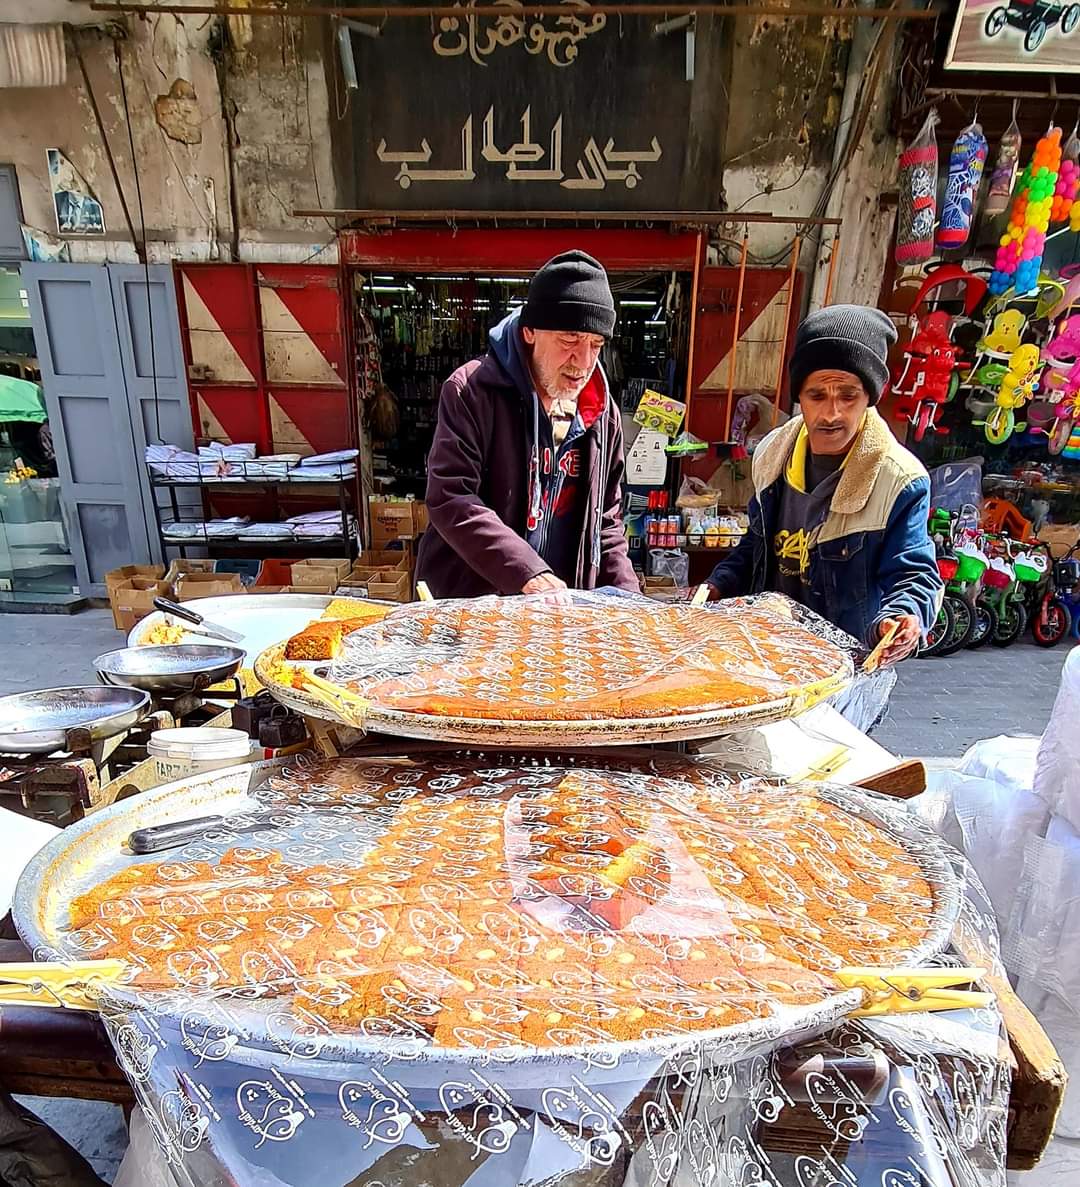 Local food sellers in the Lebanon